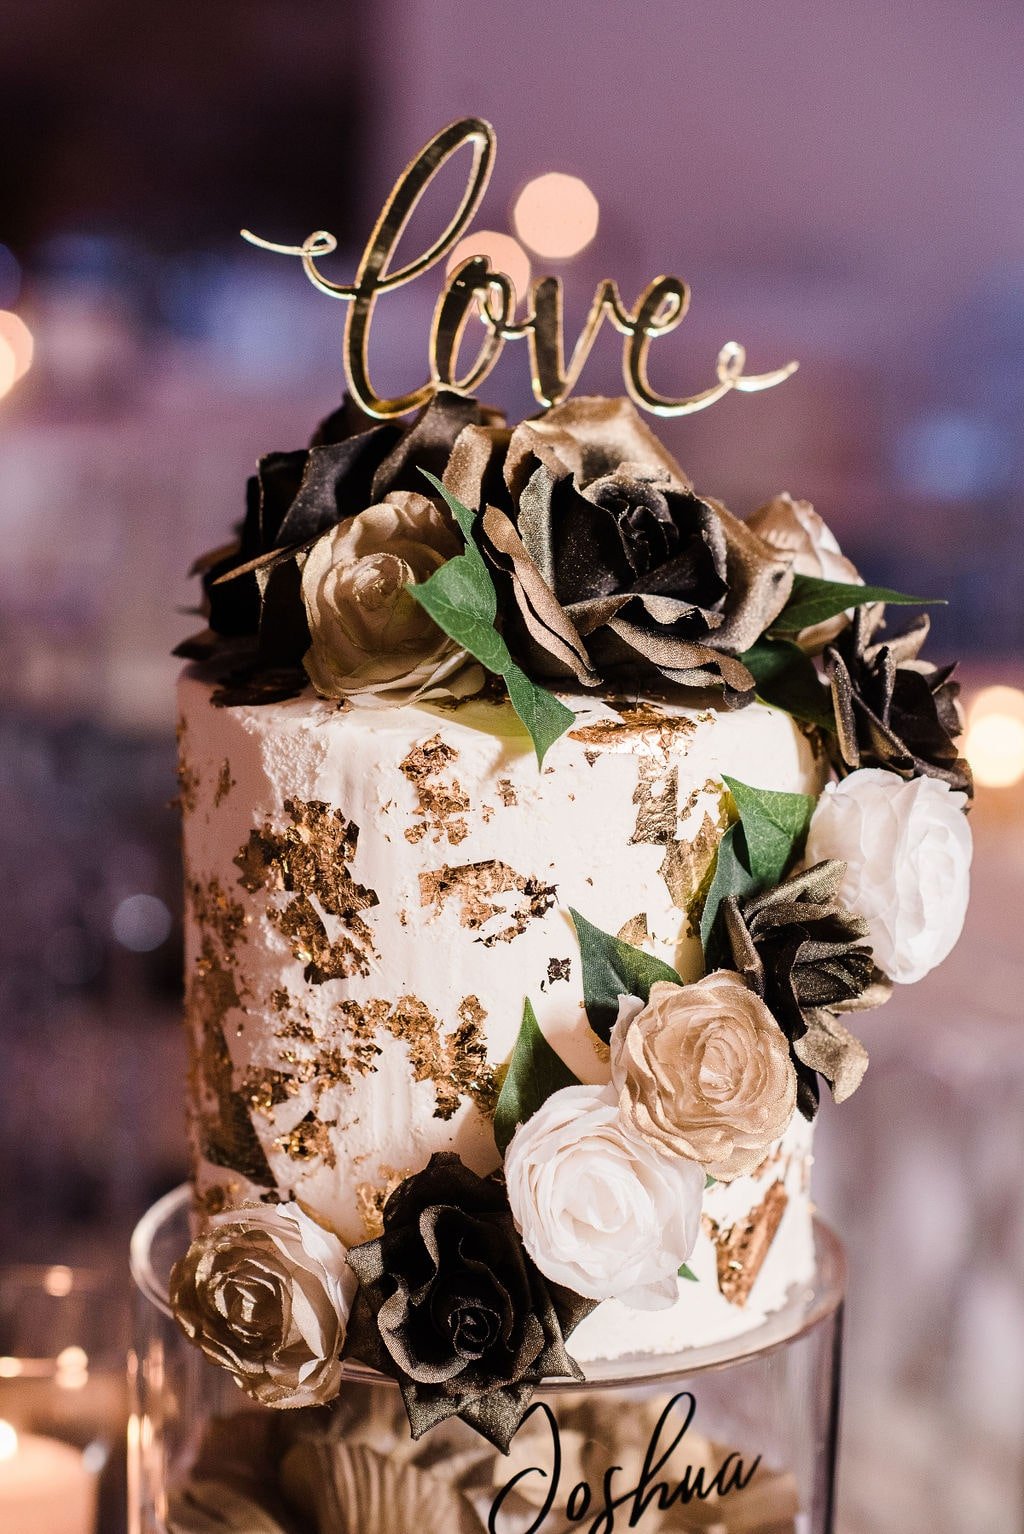 Gold and white wedding cake with real flowers